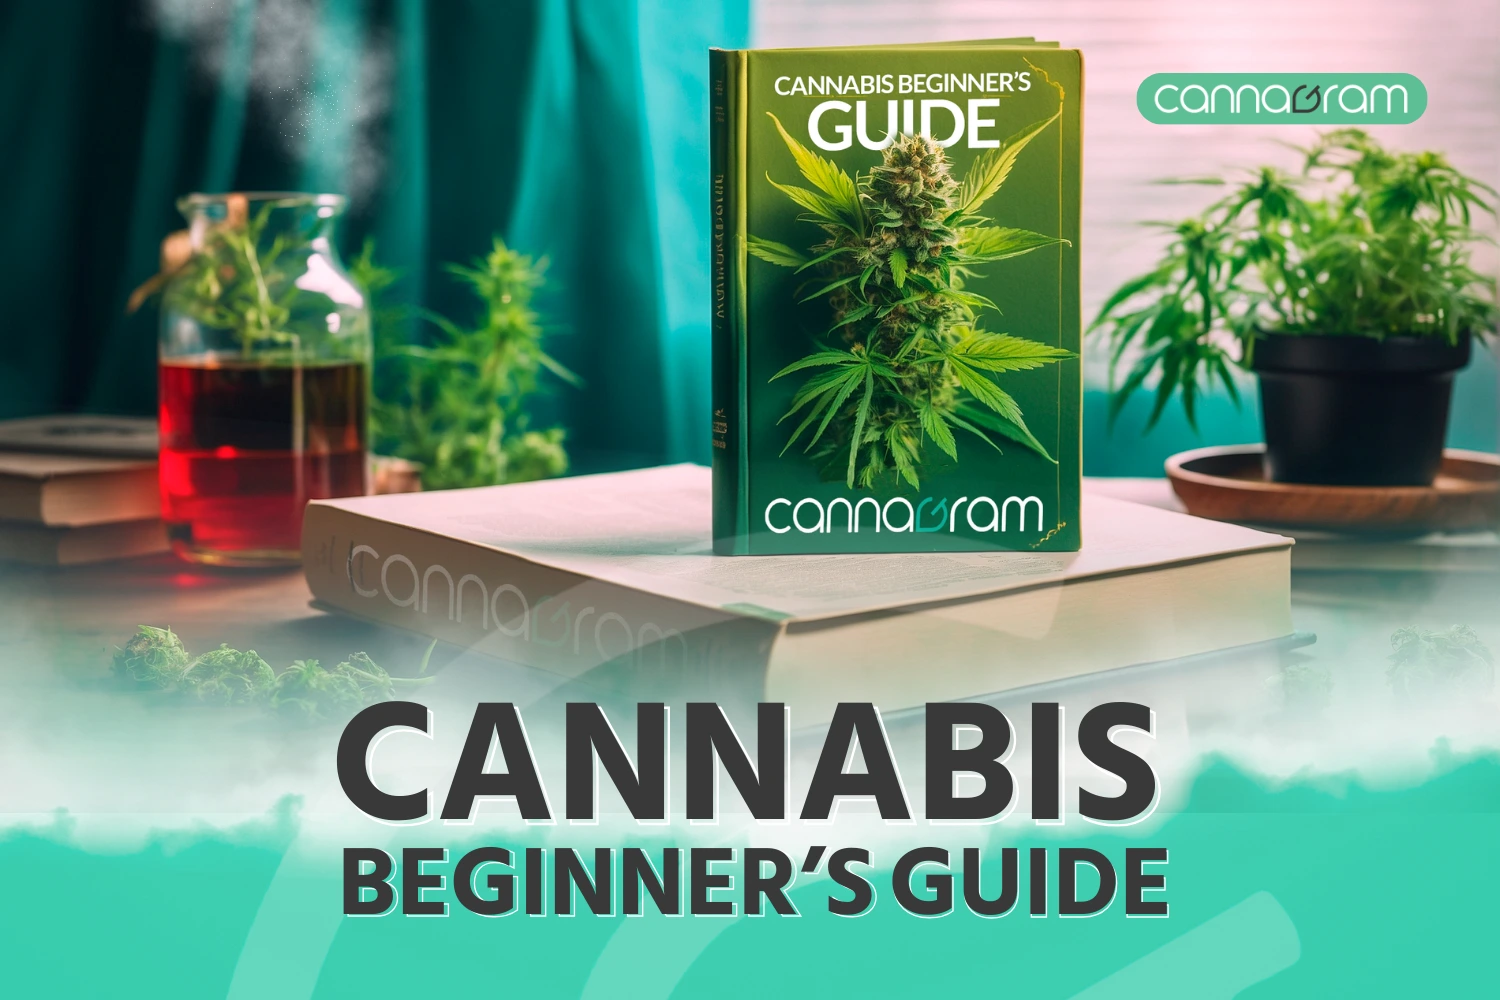 Image of cannabis beginners guide book with a weed flower - Cannagram Weed Delivery Sacramento